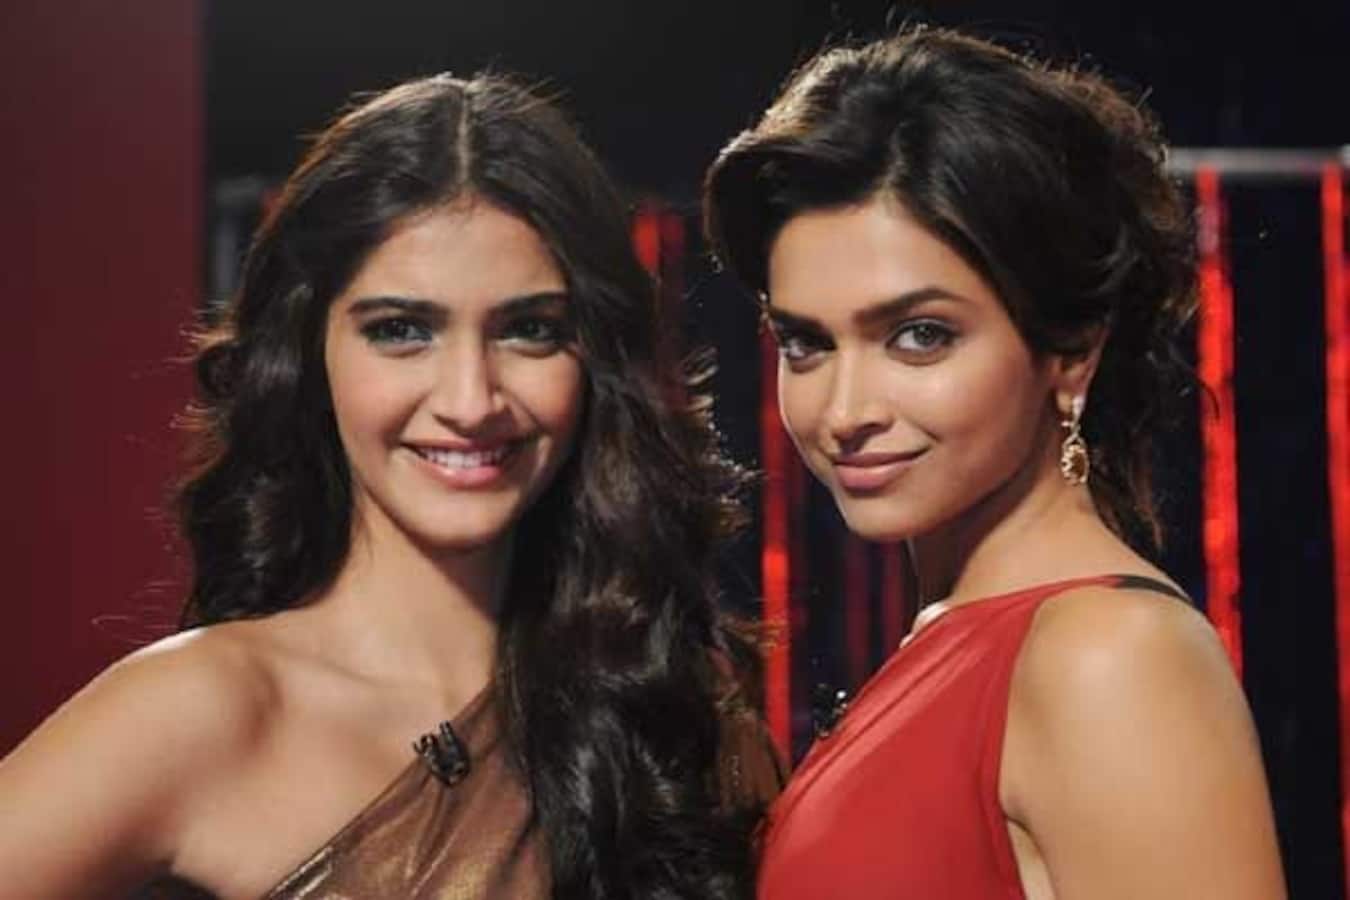 Sonam Kapoor on her equation with Deepika Padukone: I don’t know her at all